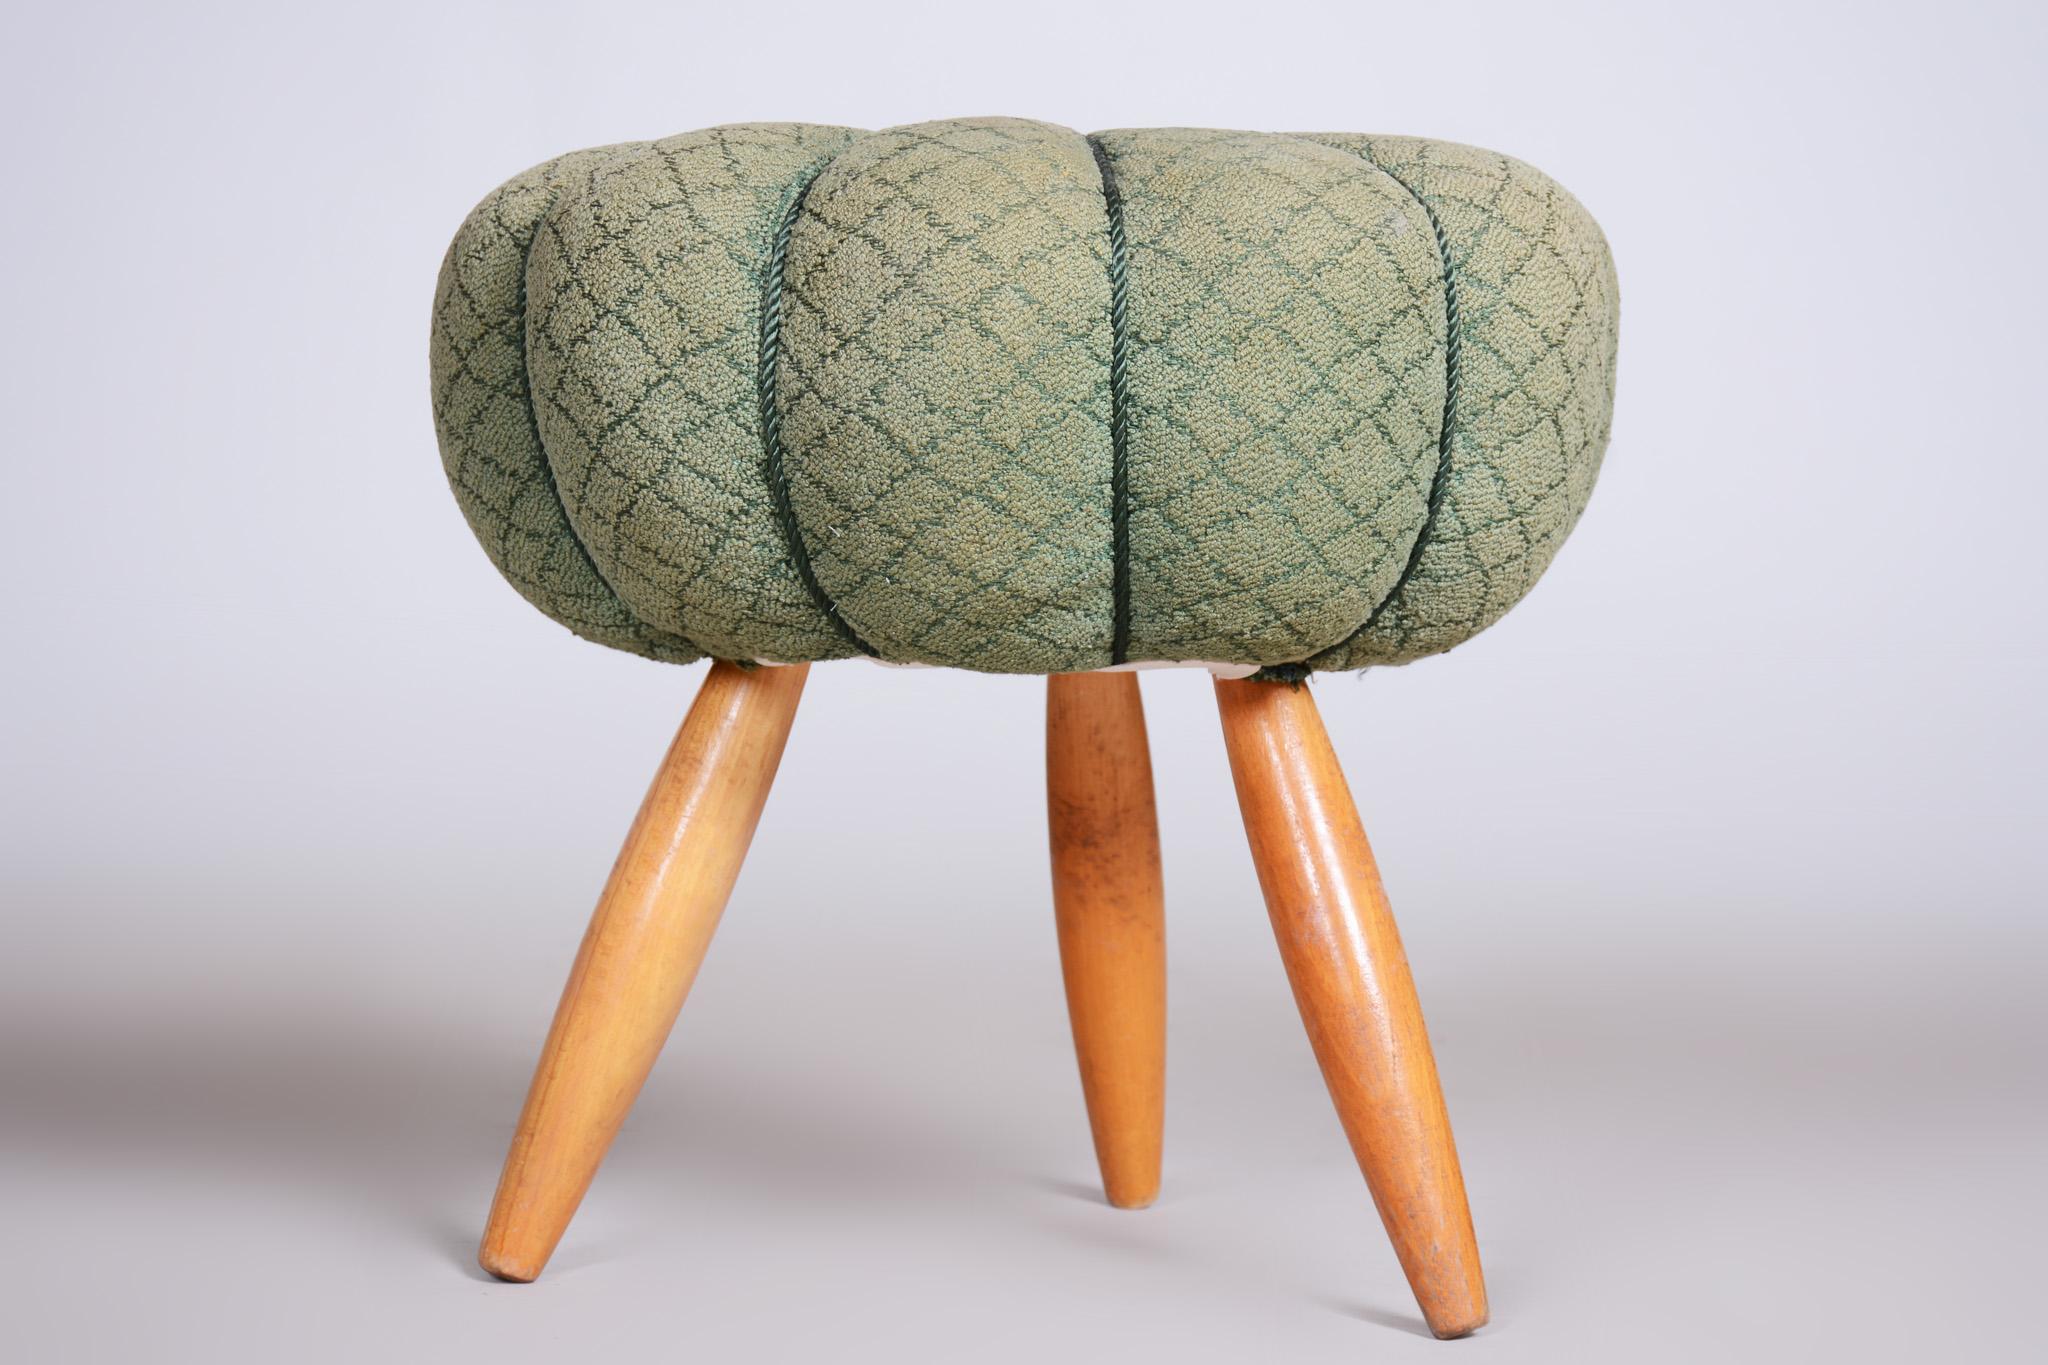 Green Midcentury Beech Stool, 1950s, Original Preserved Condition For Sale 1